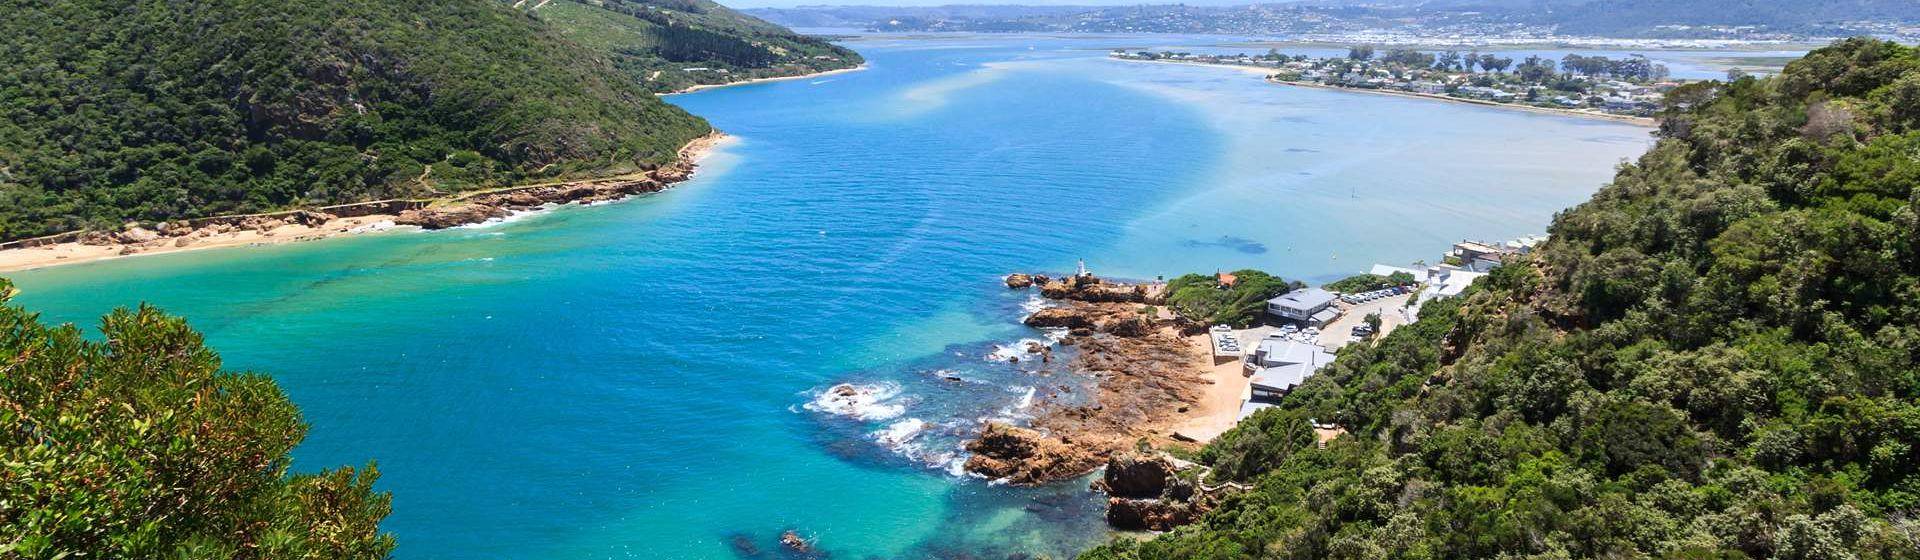 Holidays to Garden Route Image